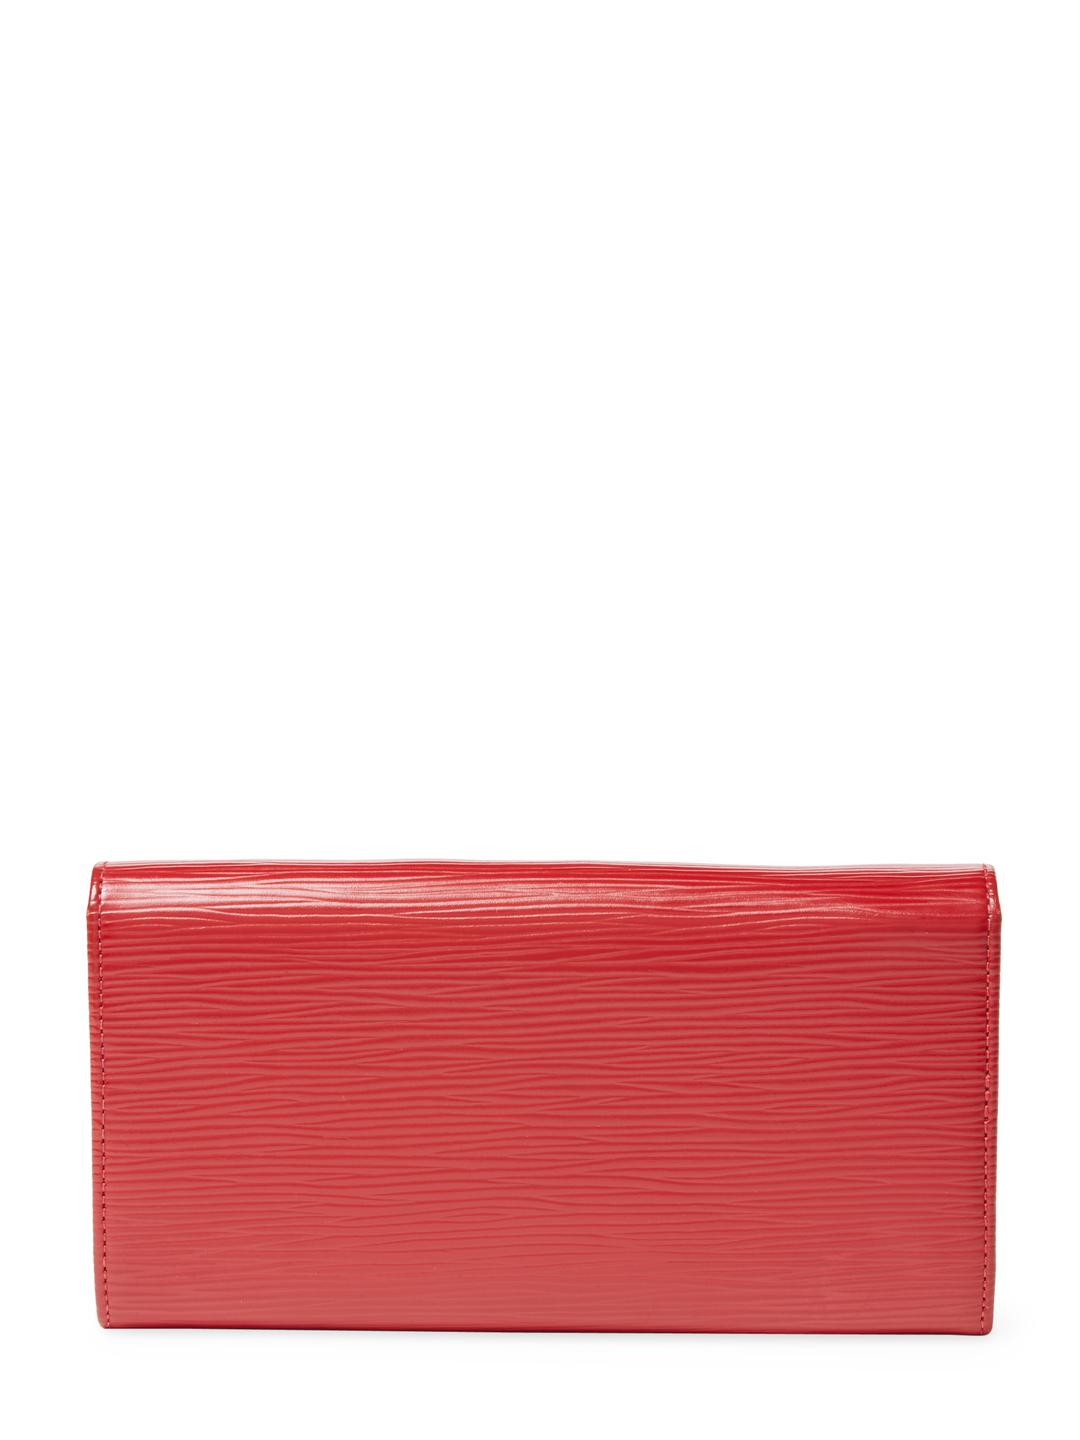 Louis Vuitton Leather Vintage Epi Sarah Wallet in Red - Lyst